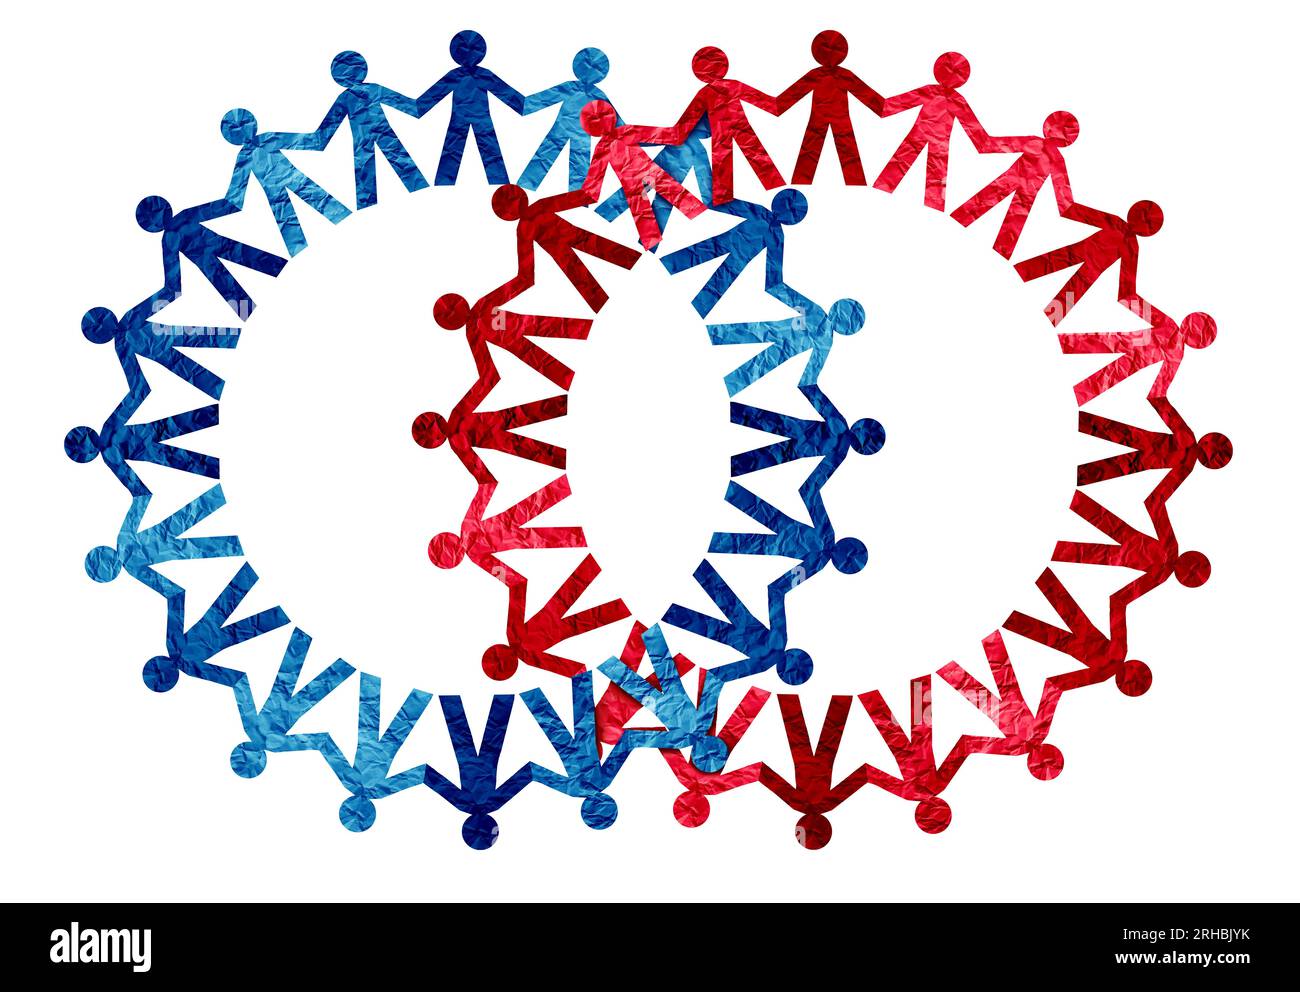 United People as two groups connected as a bipartisan concept of diversity and crowd cooperation as a red and blue group representing politics as cons Stock Photo